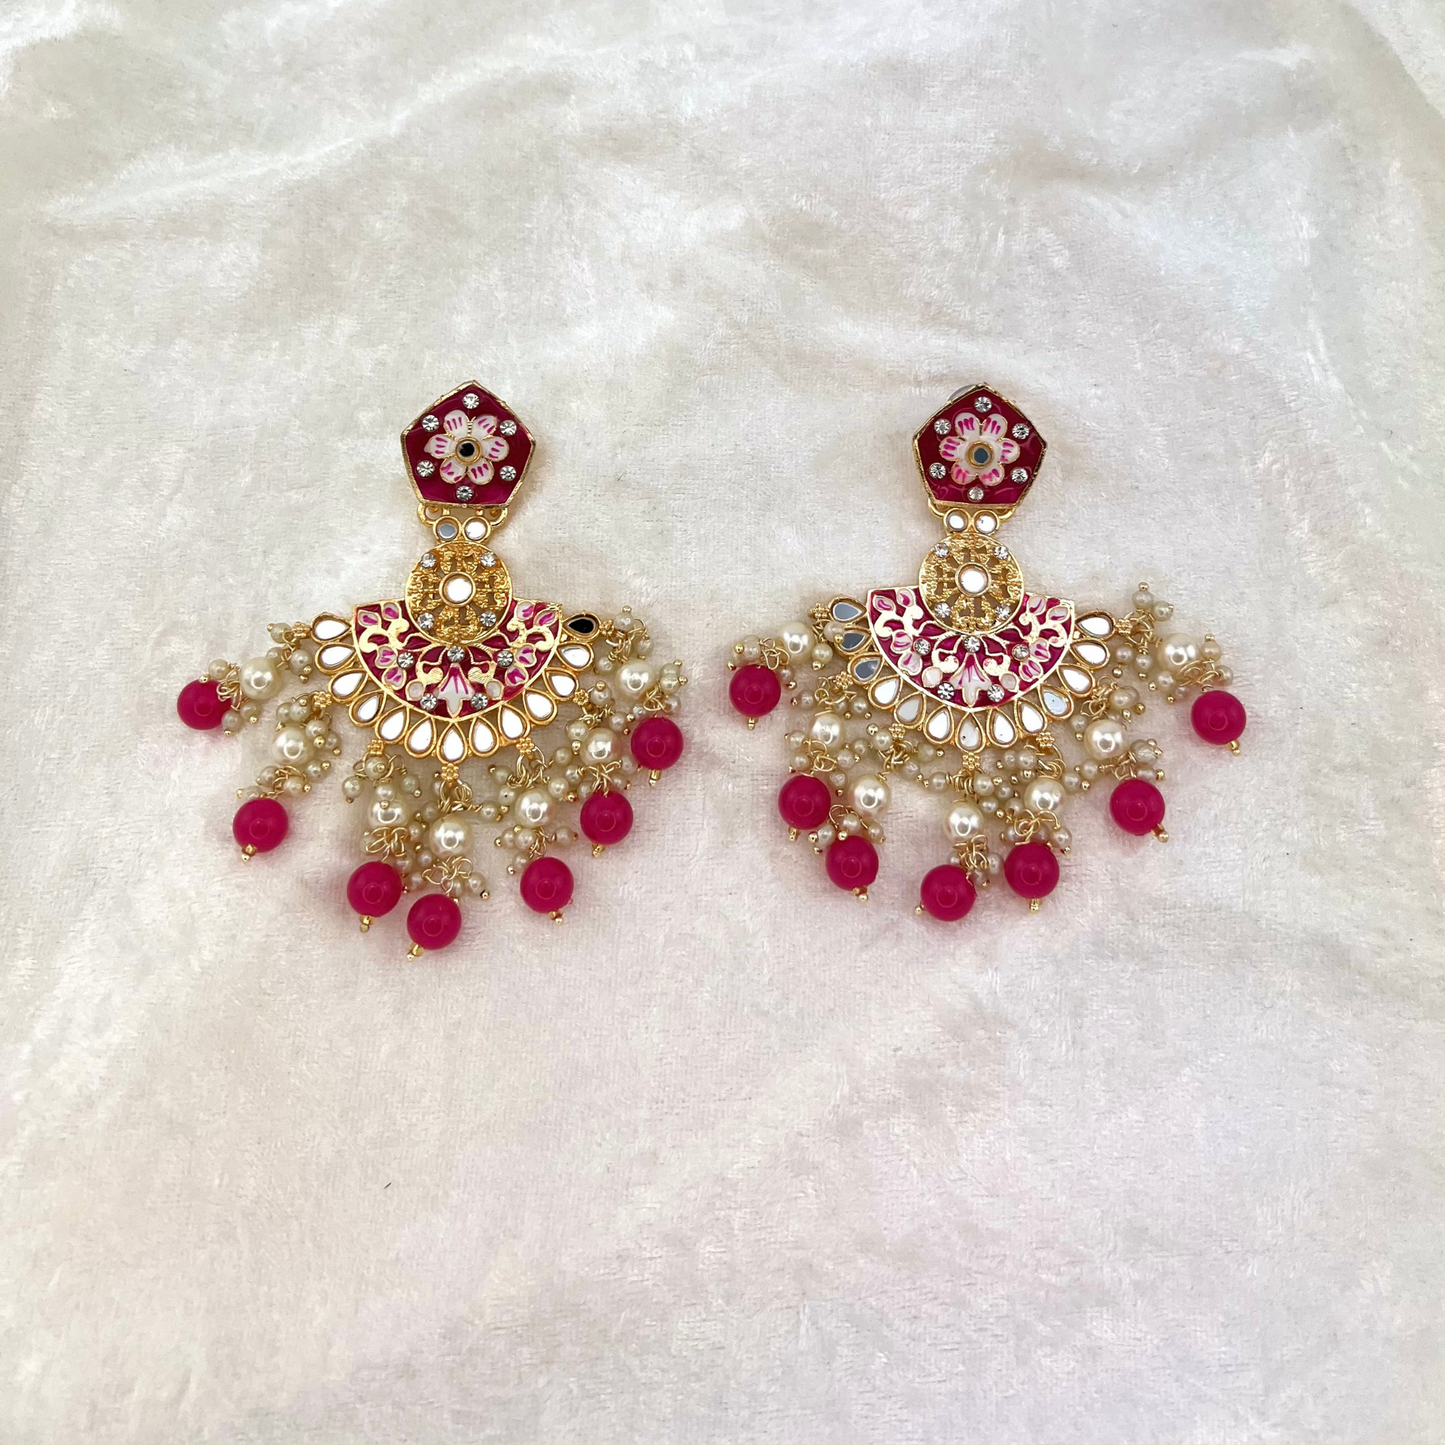 High quality hand painted earrings in Hot Pink with pearls, beads, mirrors and stone work. Latest 2022 indian jewellery for weddings, parties and special occasions.